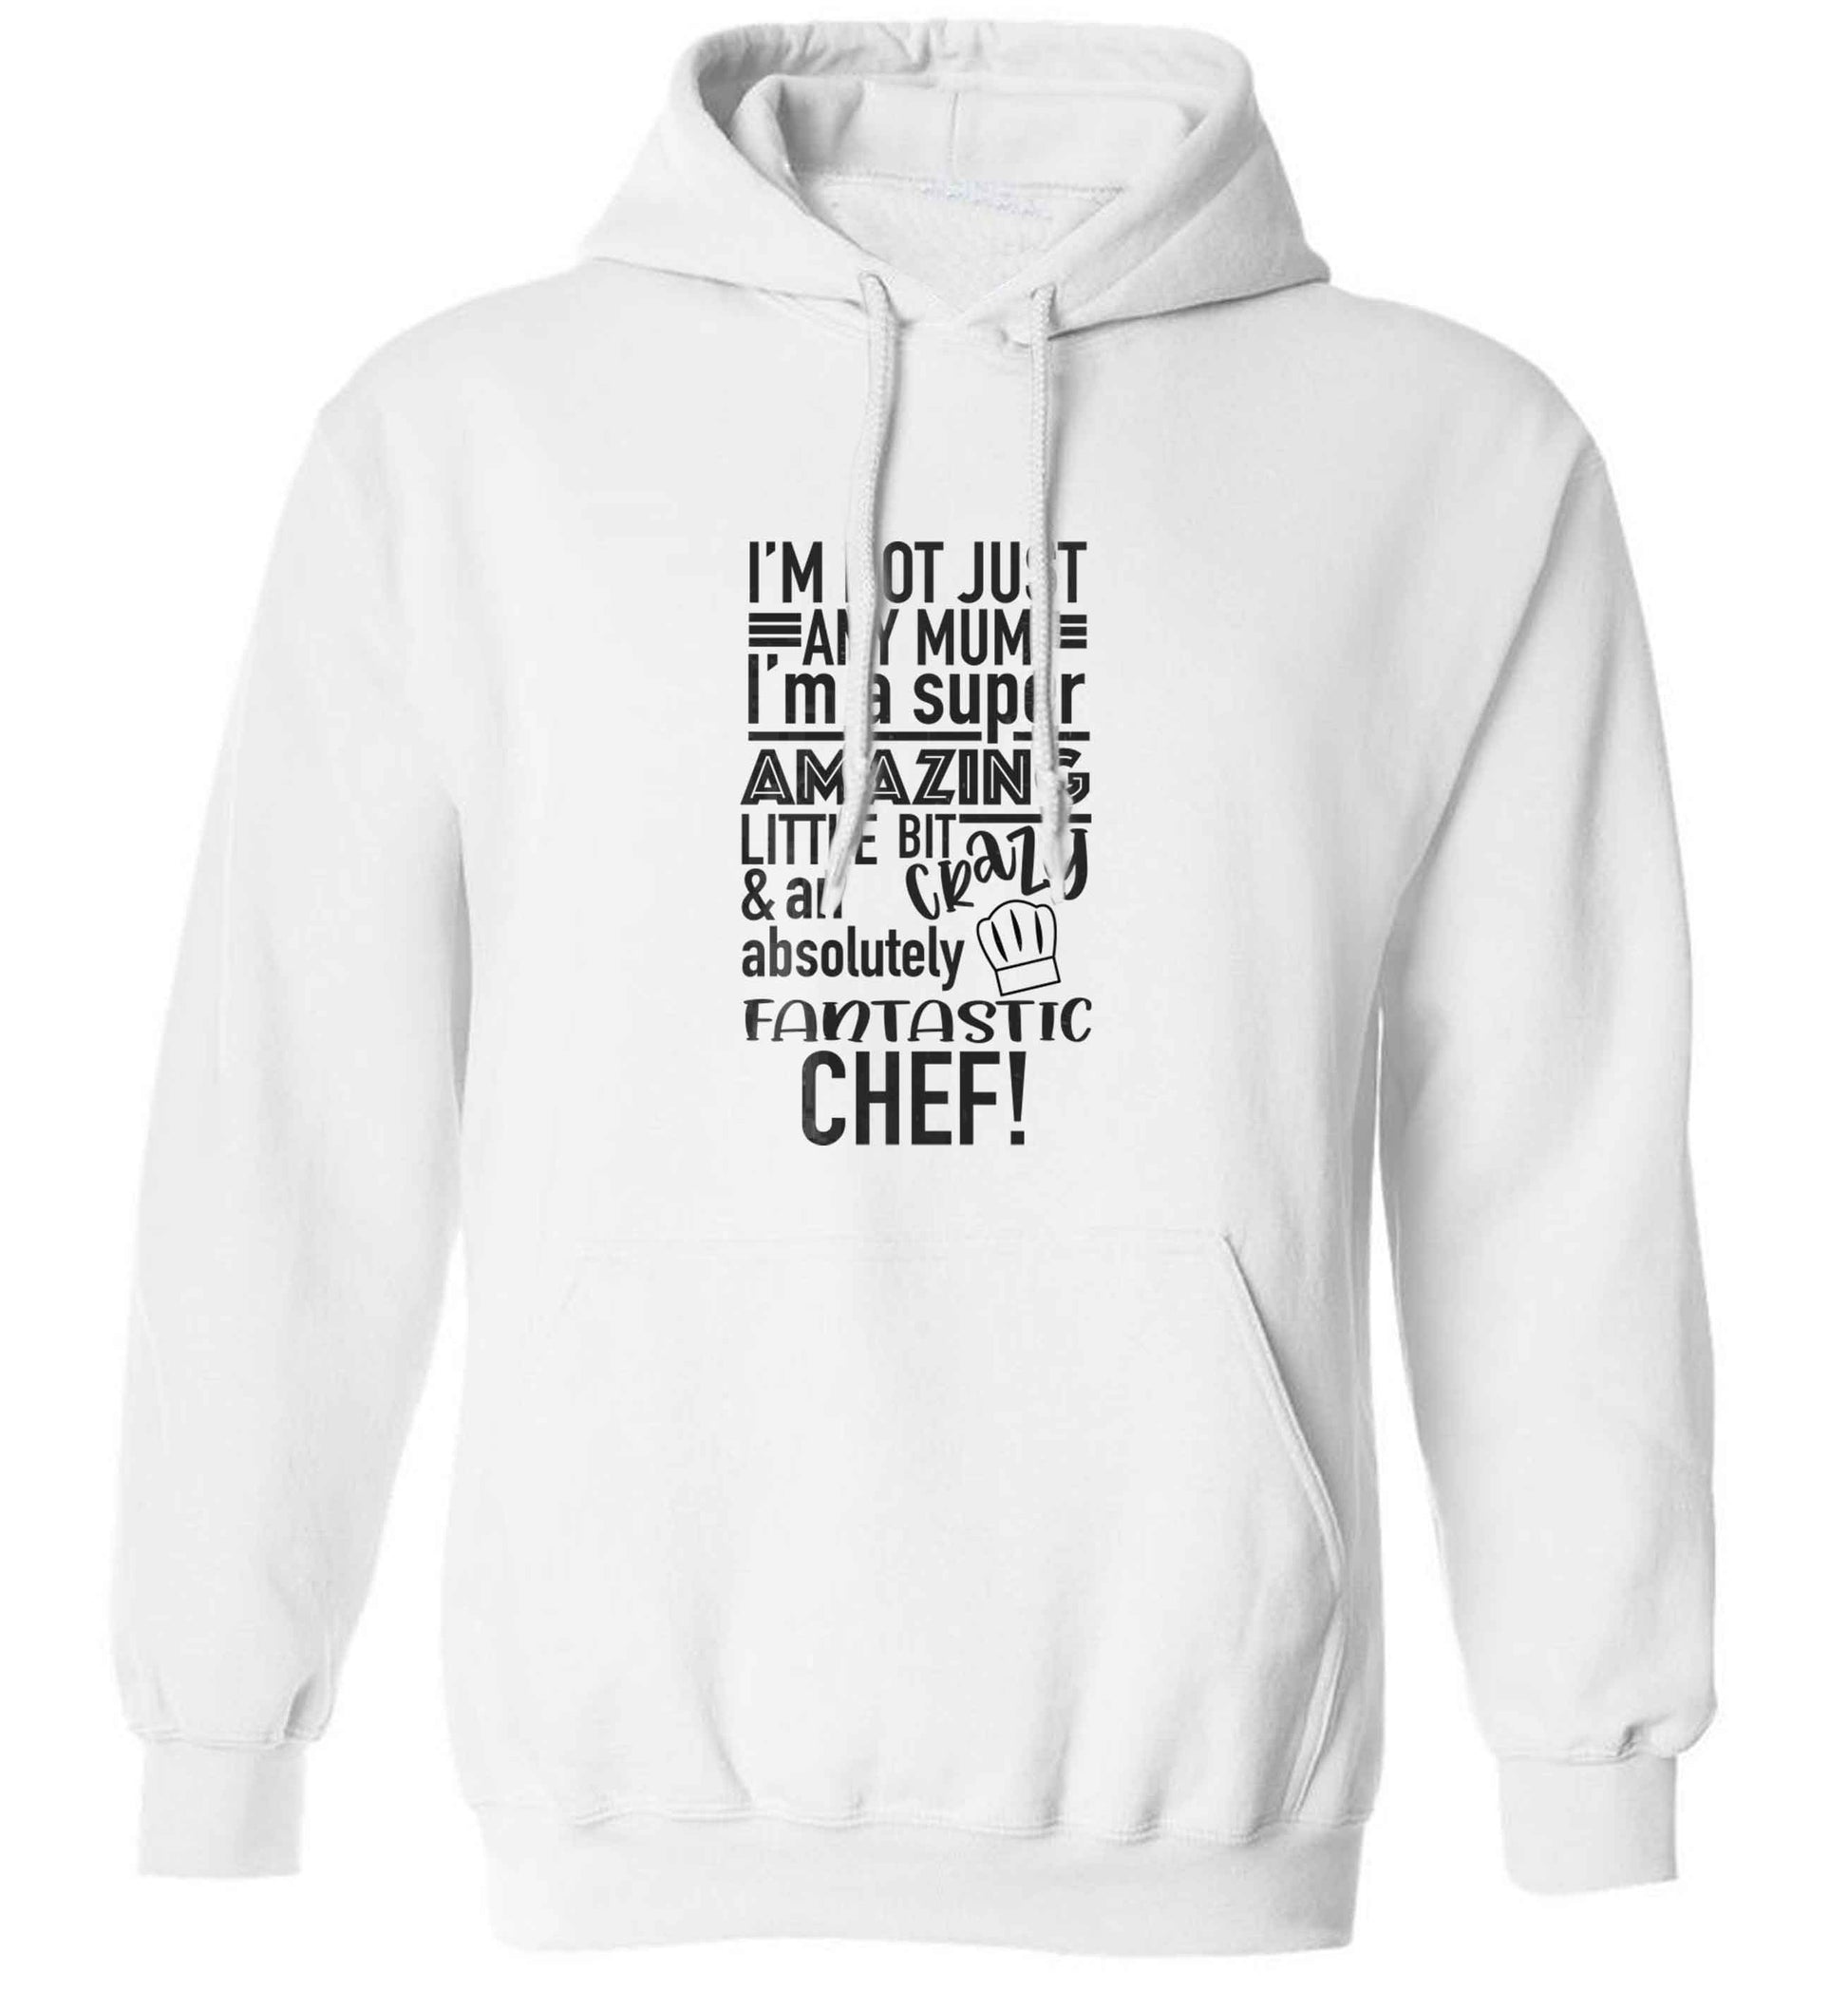 I'm not just any mum I'm a super amazing little bit crazy and an absolutely fantastic chef! adults unisex white hoodie 2XL